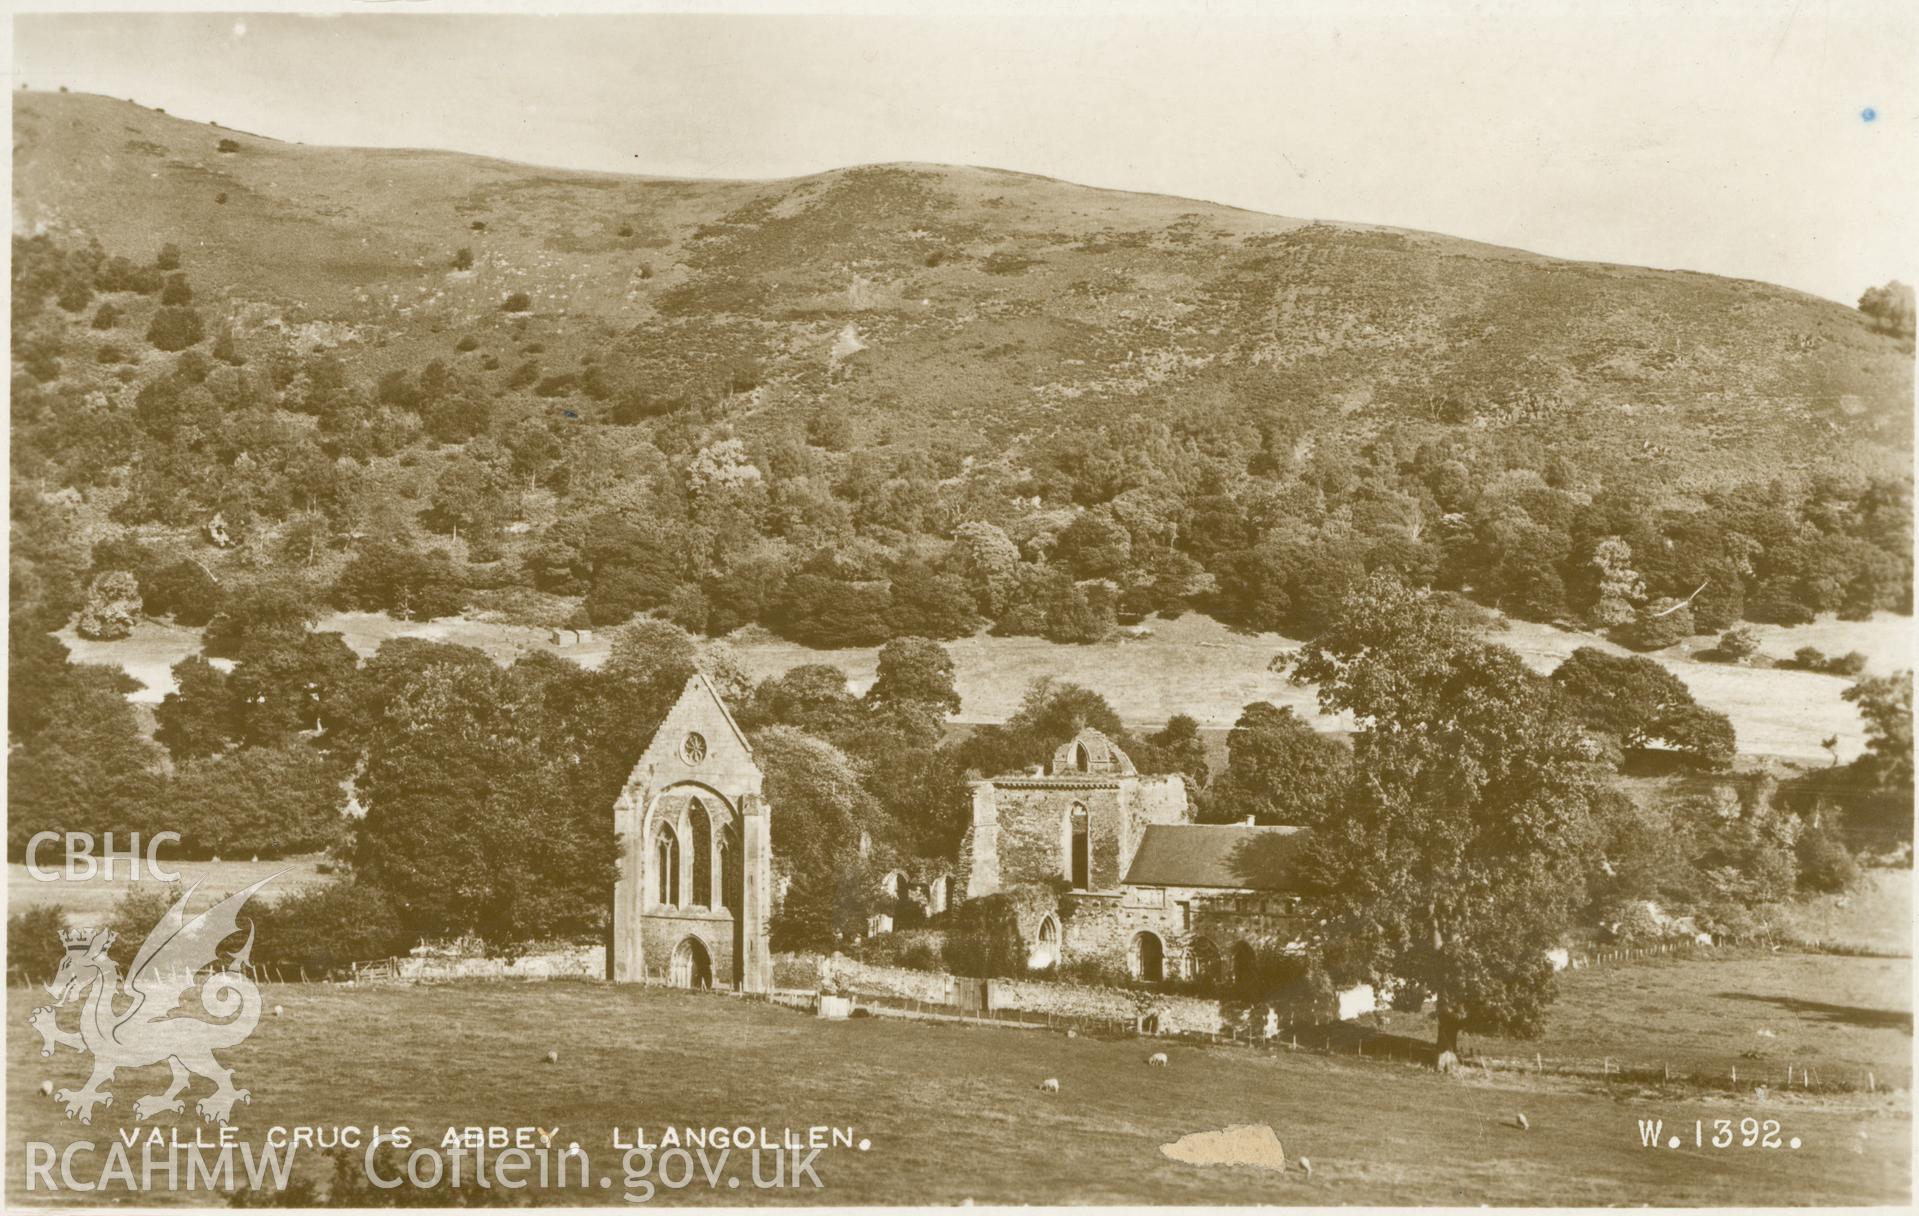 Valentine's postcard view showing general view of Valle Crucis Abbey.